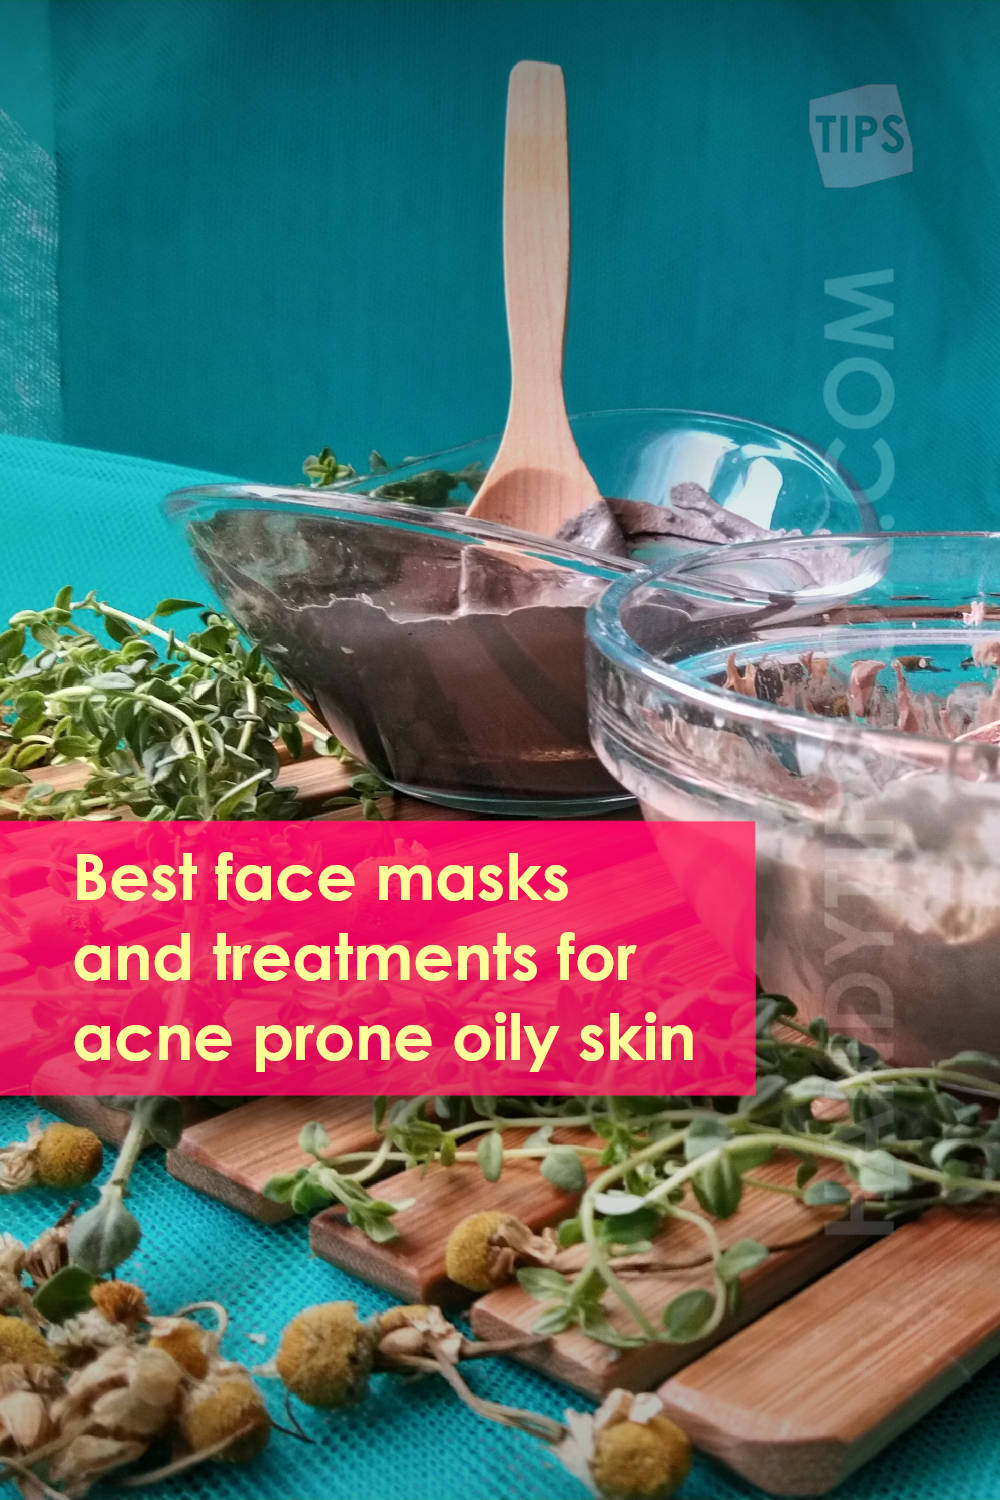 Best face masks and treatments for acne-prone oily skin. Types, ingredients, recipes, usage. Vertical image.